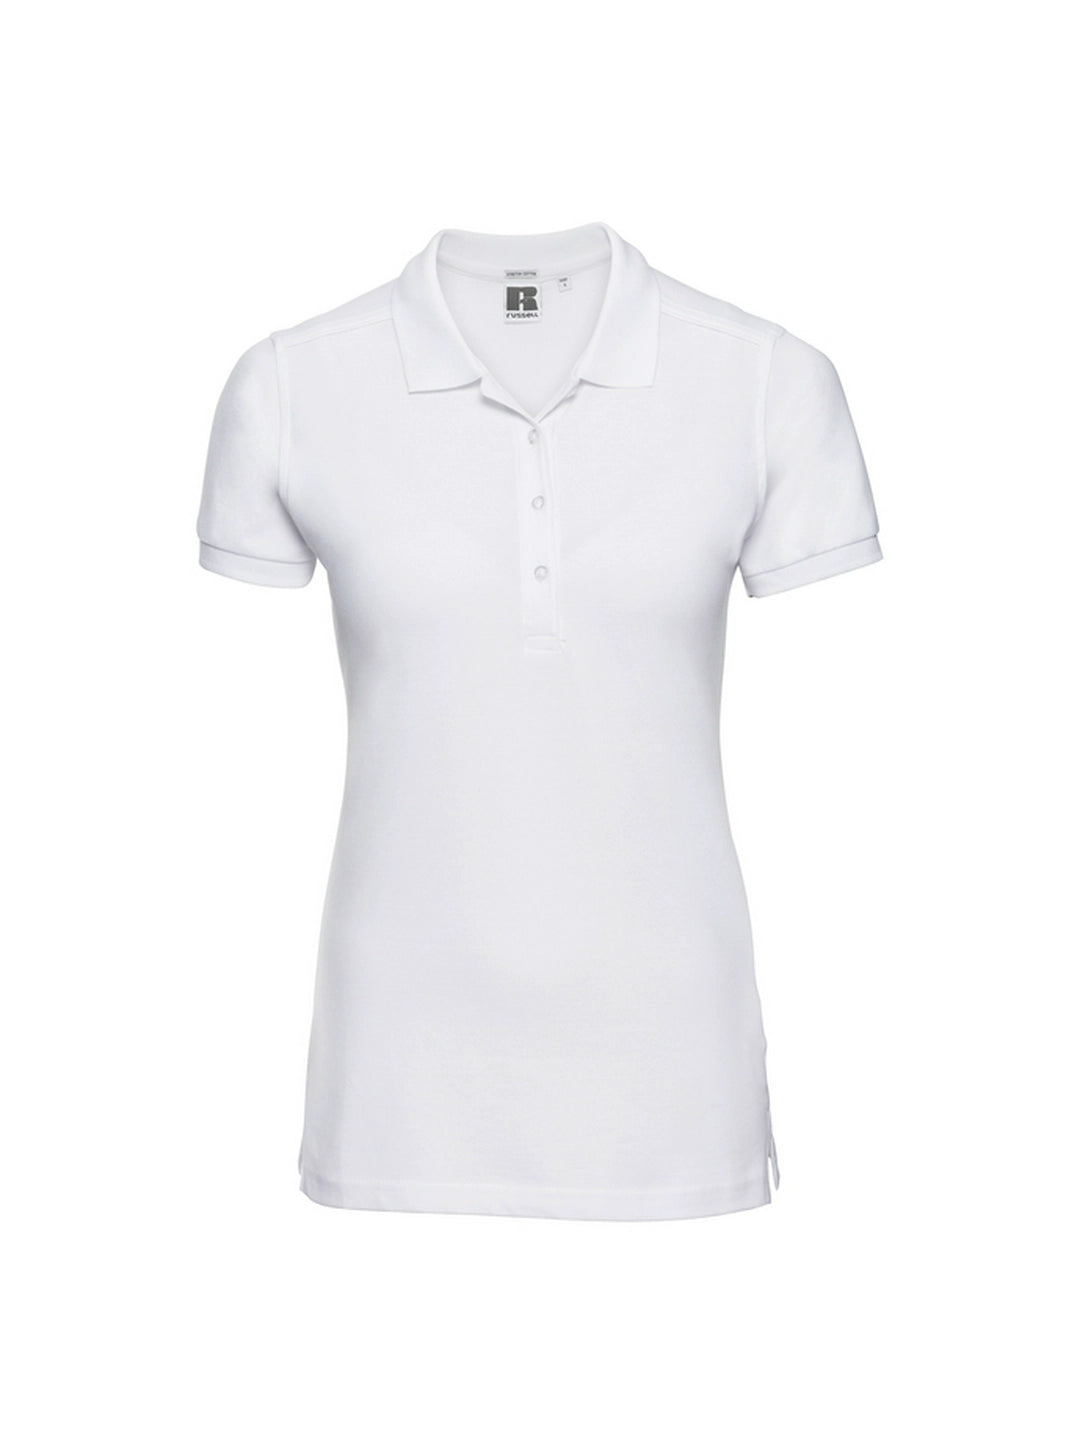 Russell 566F Ladies Stretch Cotton Polo Shirt - COOZO